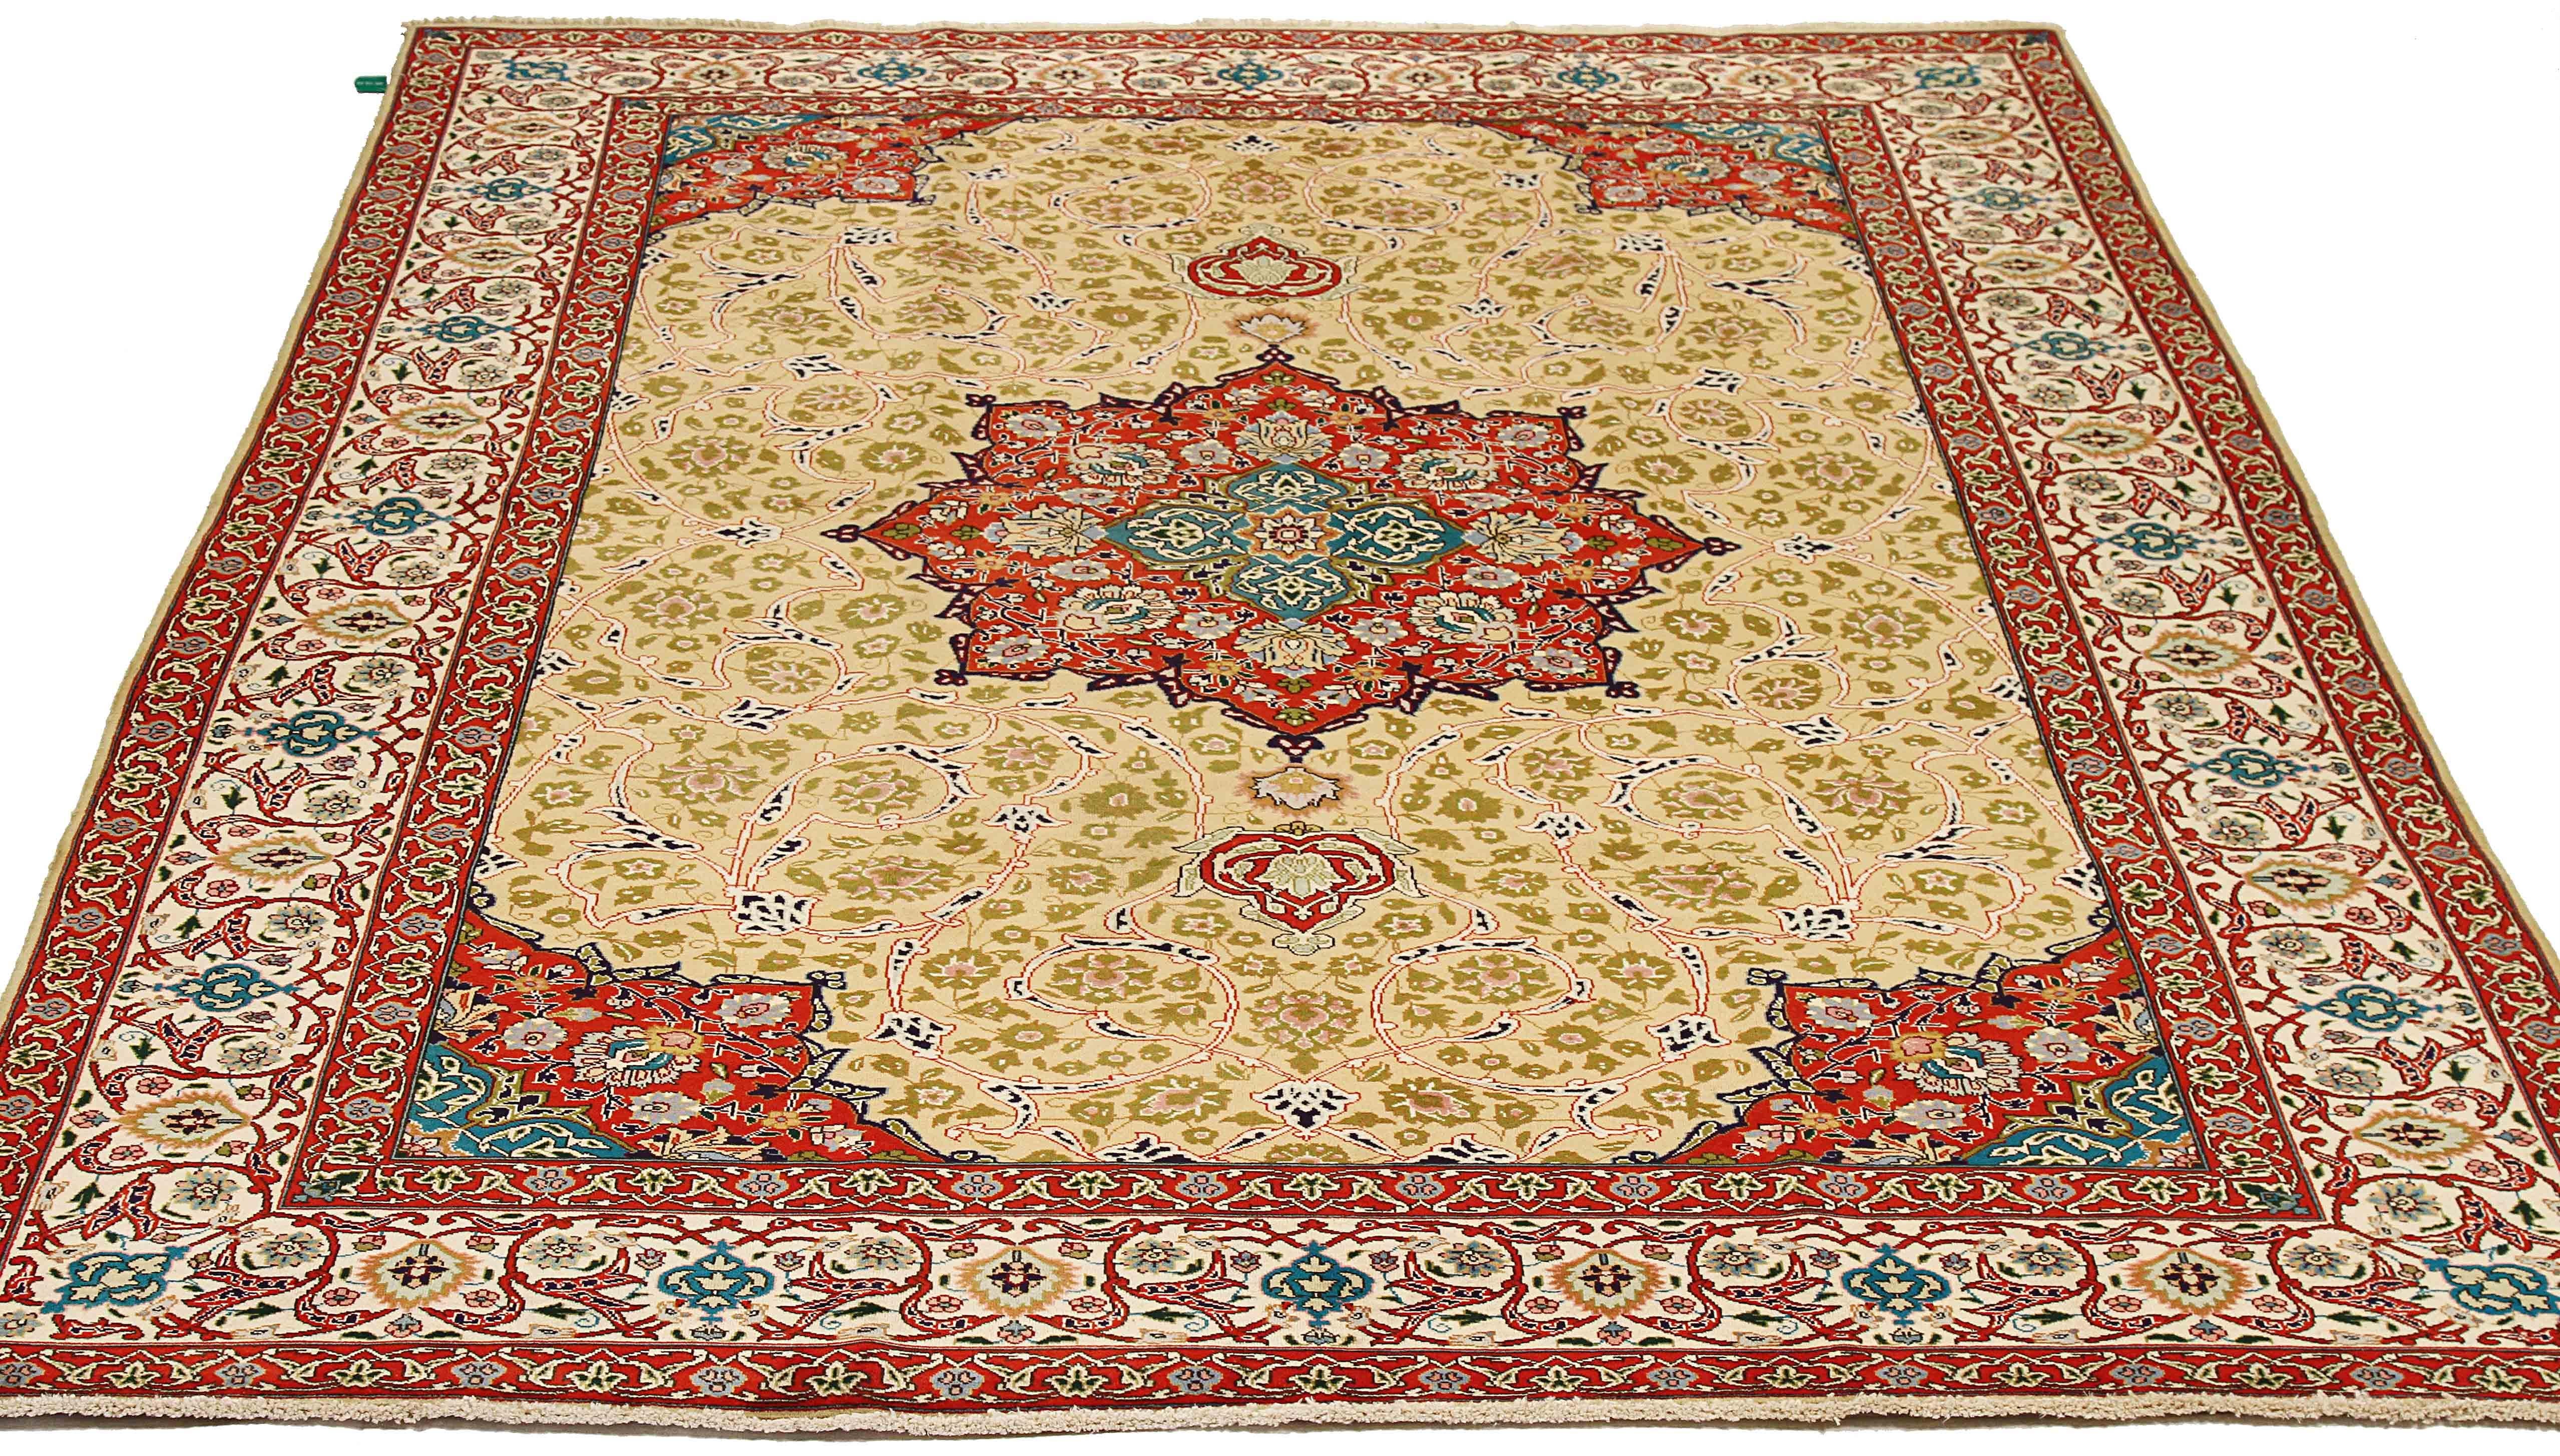 Antique Persian rug handwoven from the finest sheep’s wool and colored with all-natural vegetable dyes that are safe for humans and pets. It’s a traditional Tabriz weaving featuring a lovely ensemble of floral details in green and pink on its center